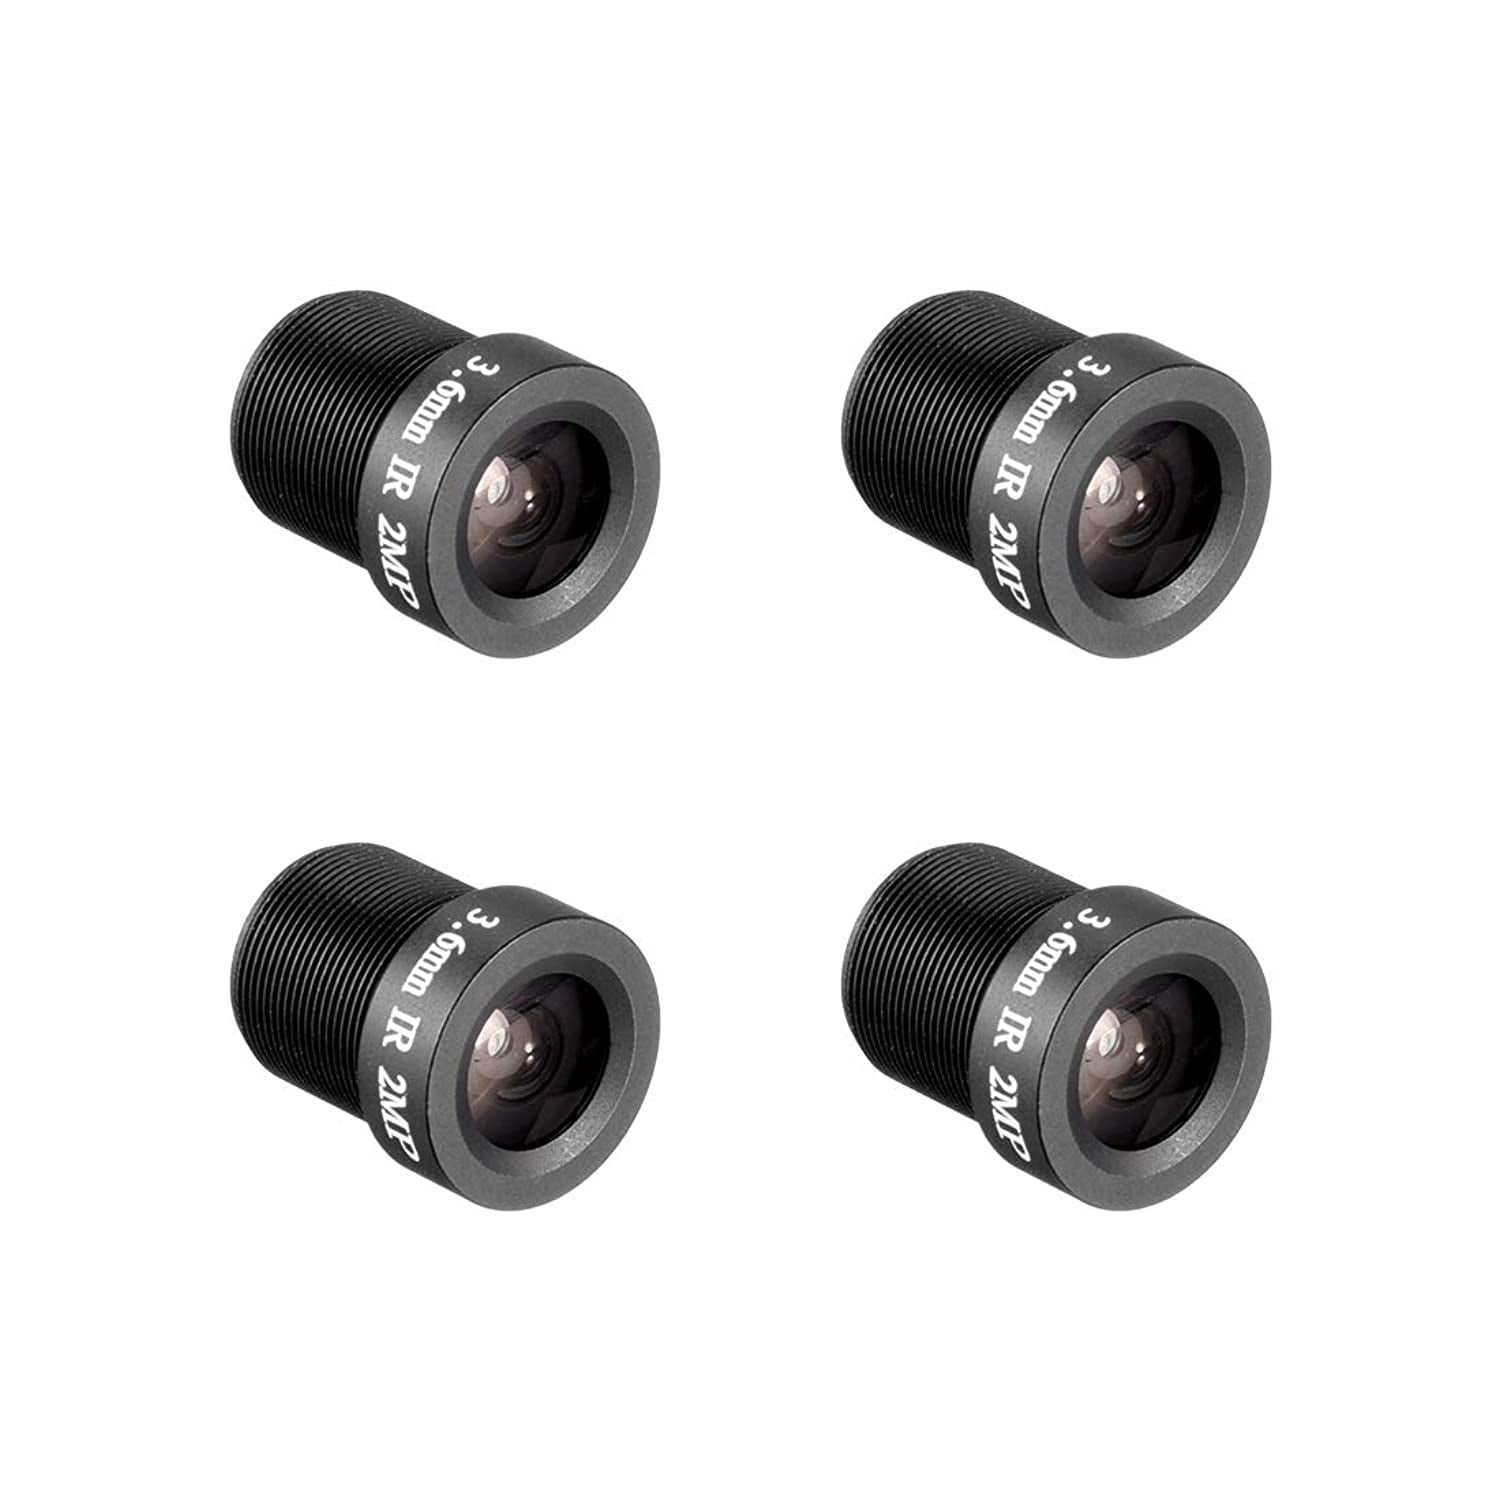 uxcell 6mm 720P F1.4 FPV CCTV Lens Wide Angle for CCD Camera